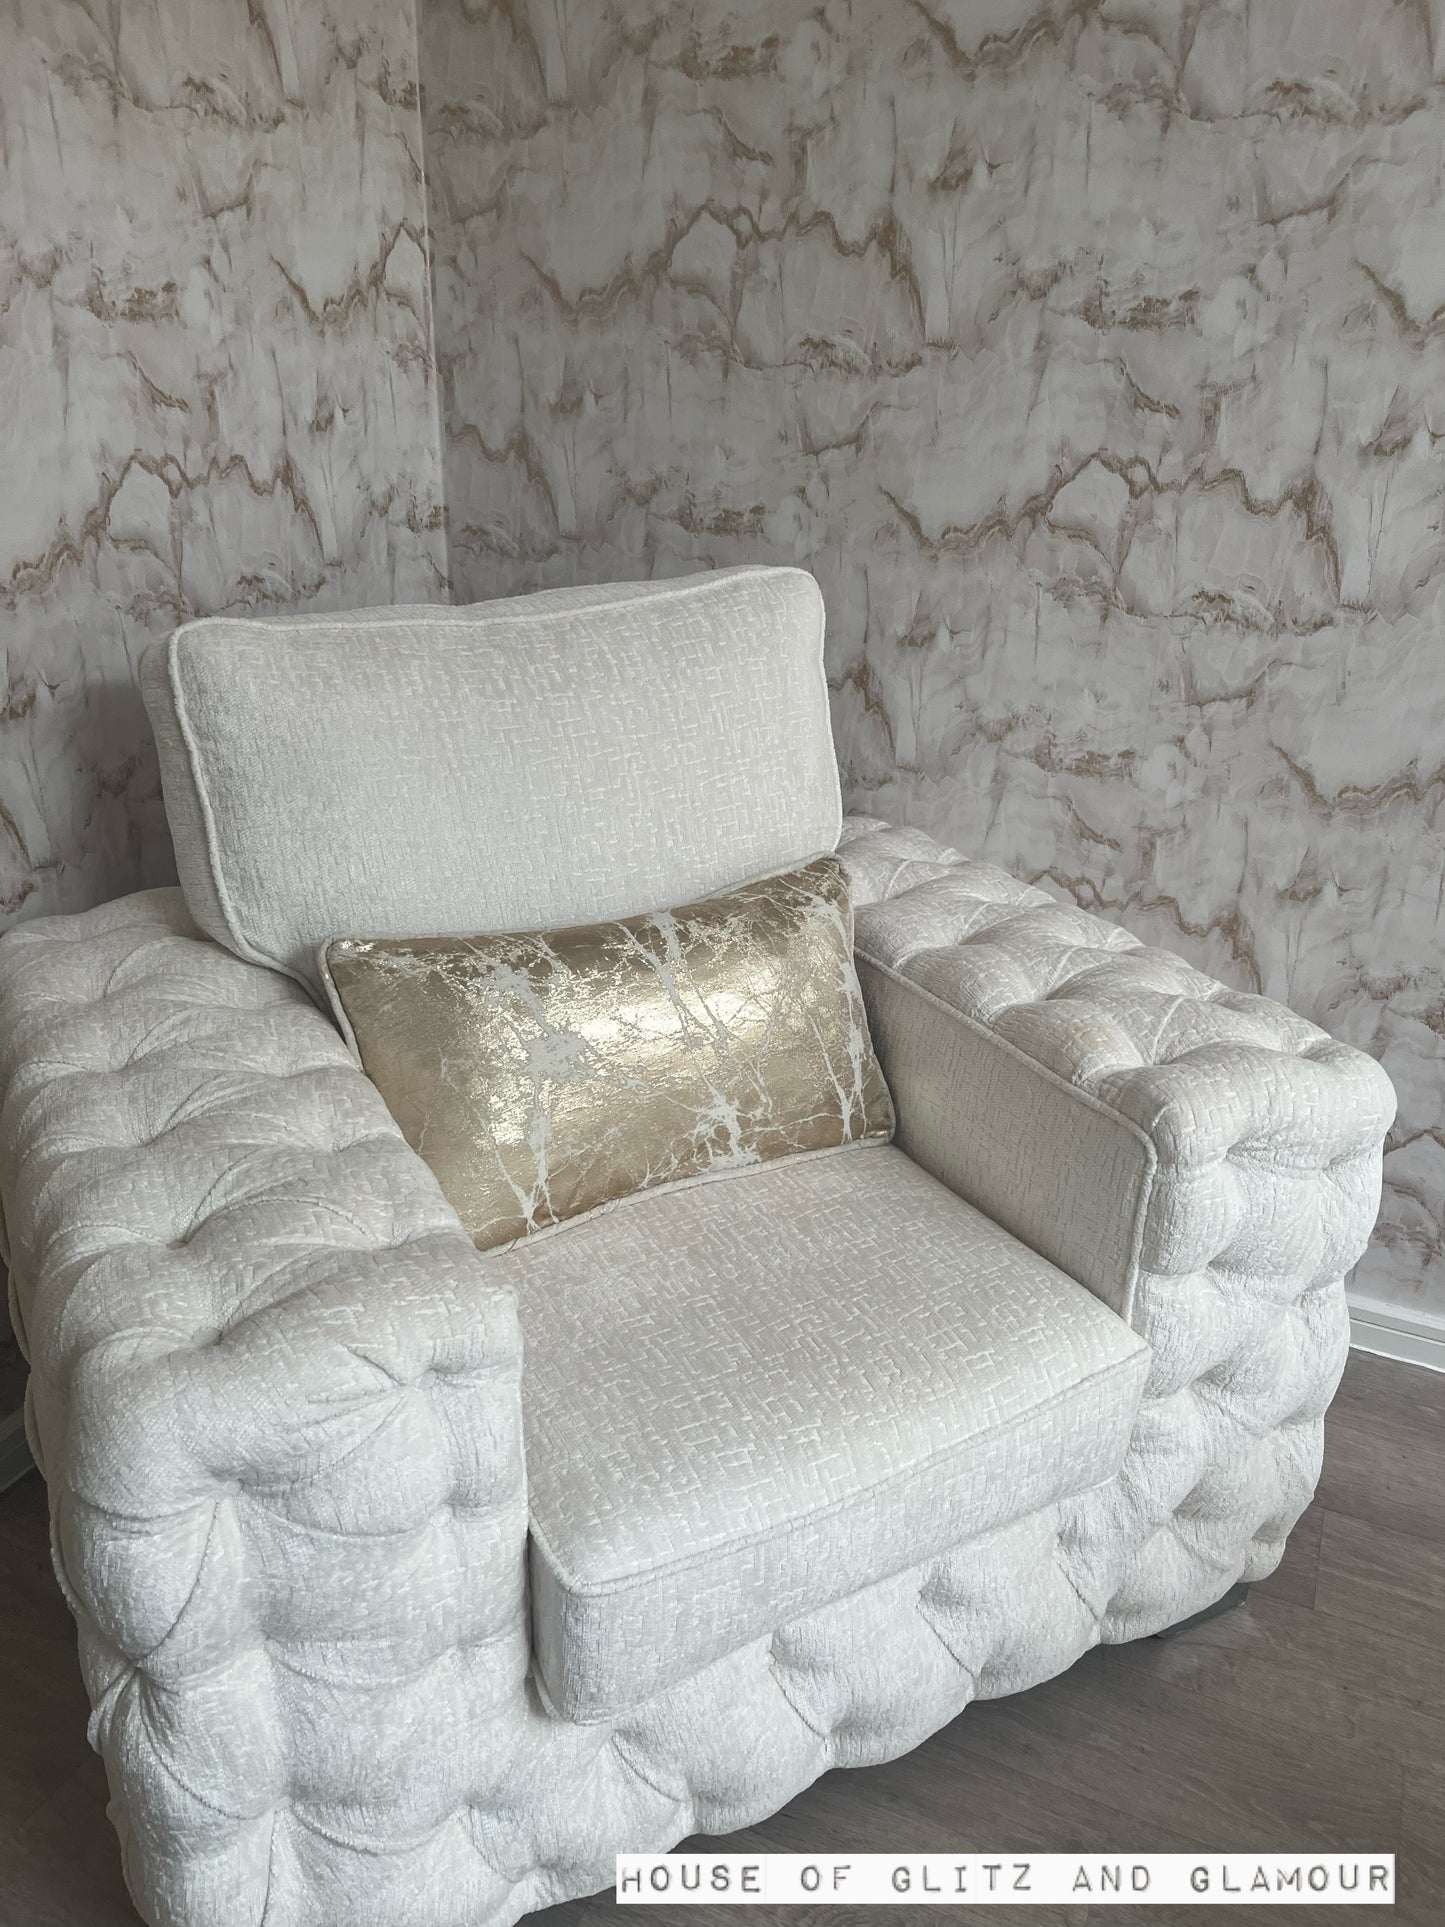 Love Sofa 3 Seater, 2 Seater & Arm Chair - Ivory